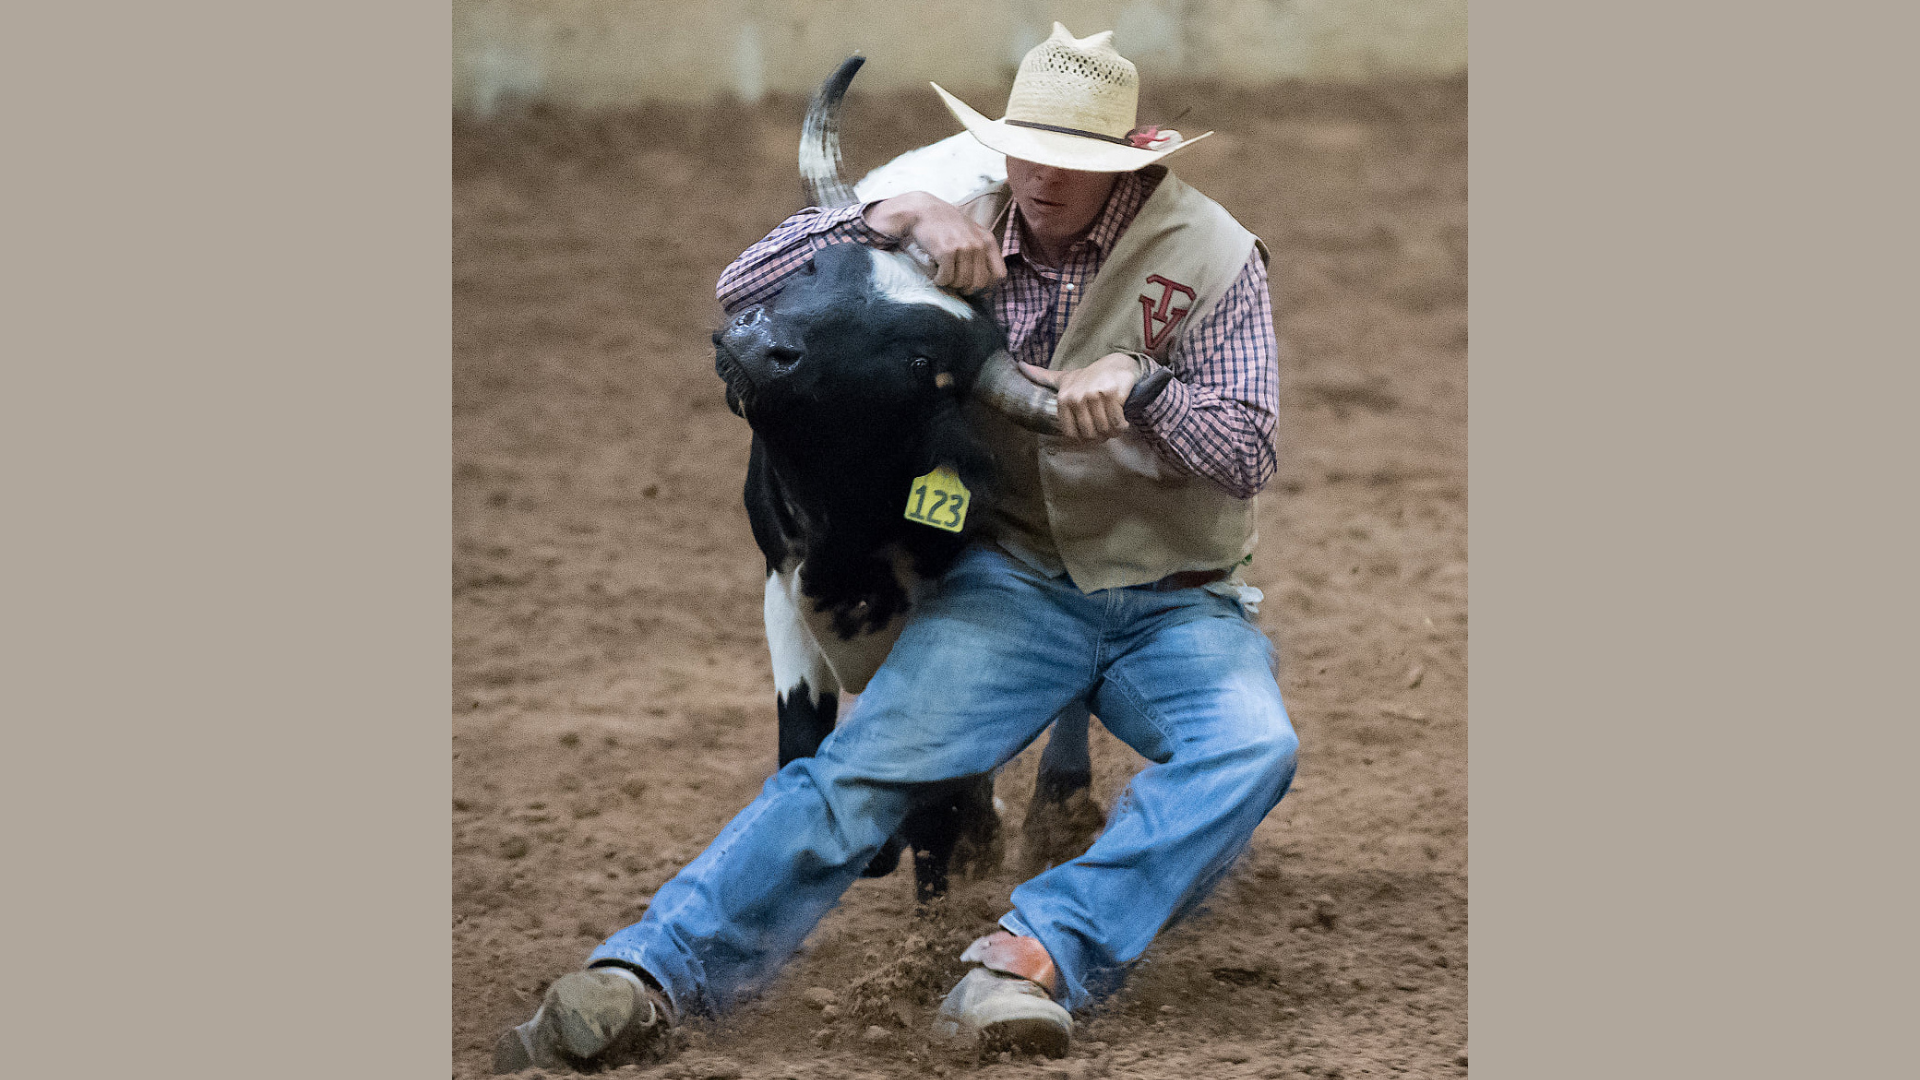 'GREAT SUCCESS': 14th annual rodeo successful